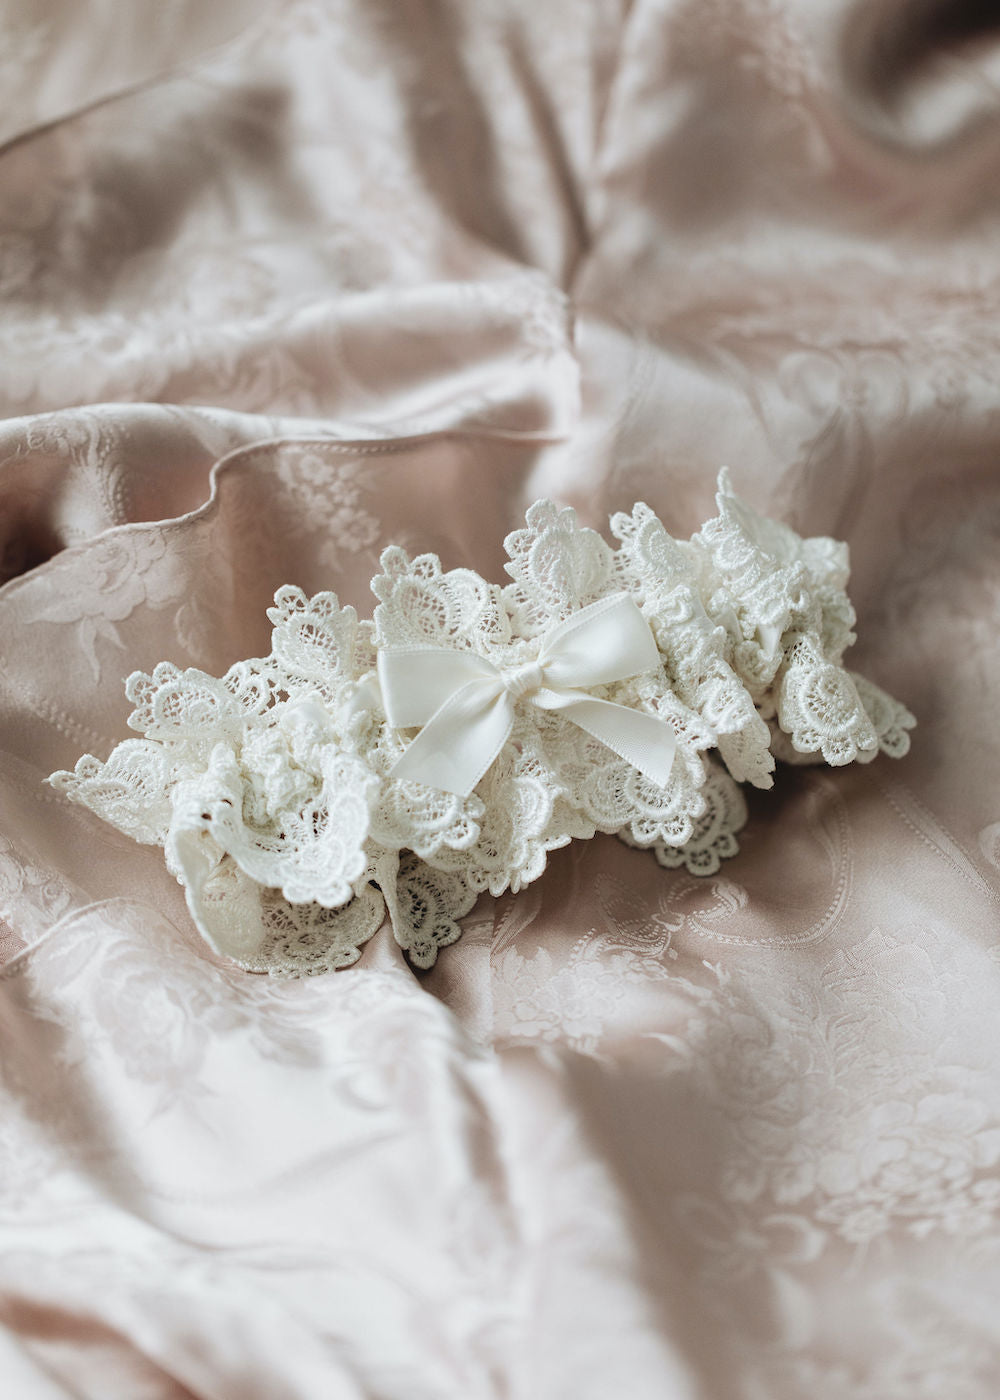 personalized wedding garter made from bride's mother's silk & lace wedding dress - handmade heirloom by The Garter Girl